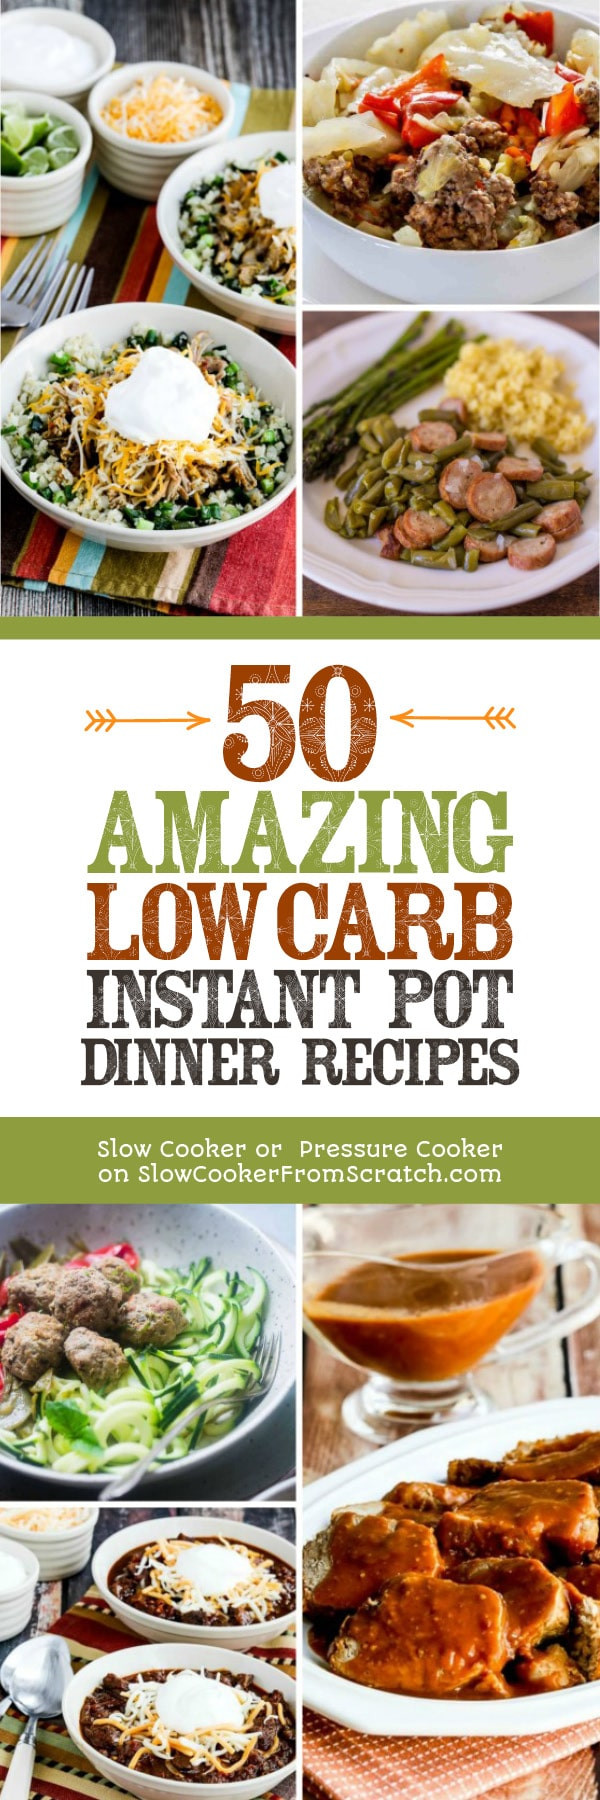 Low Carb Pressure Cooker Recipes
 50 AMAZING Low Carb Instant Pot Dinner Recipes Slow